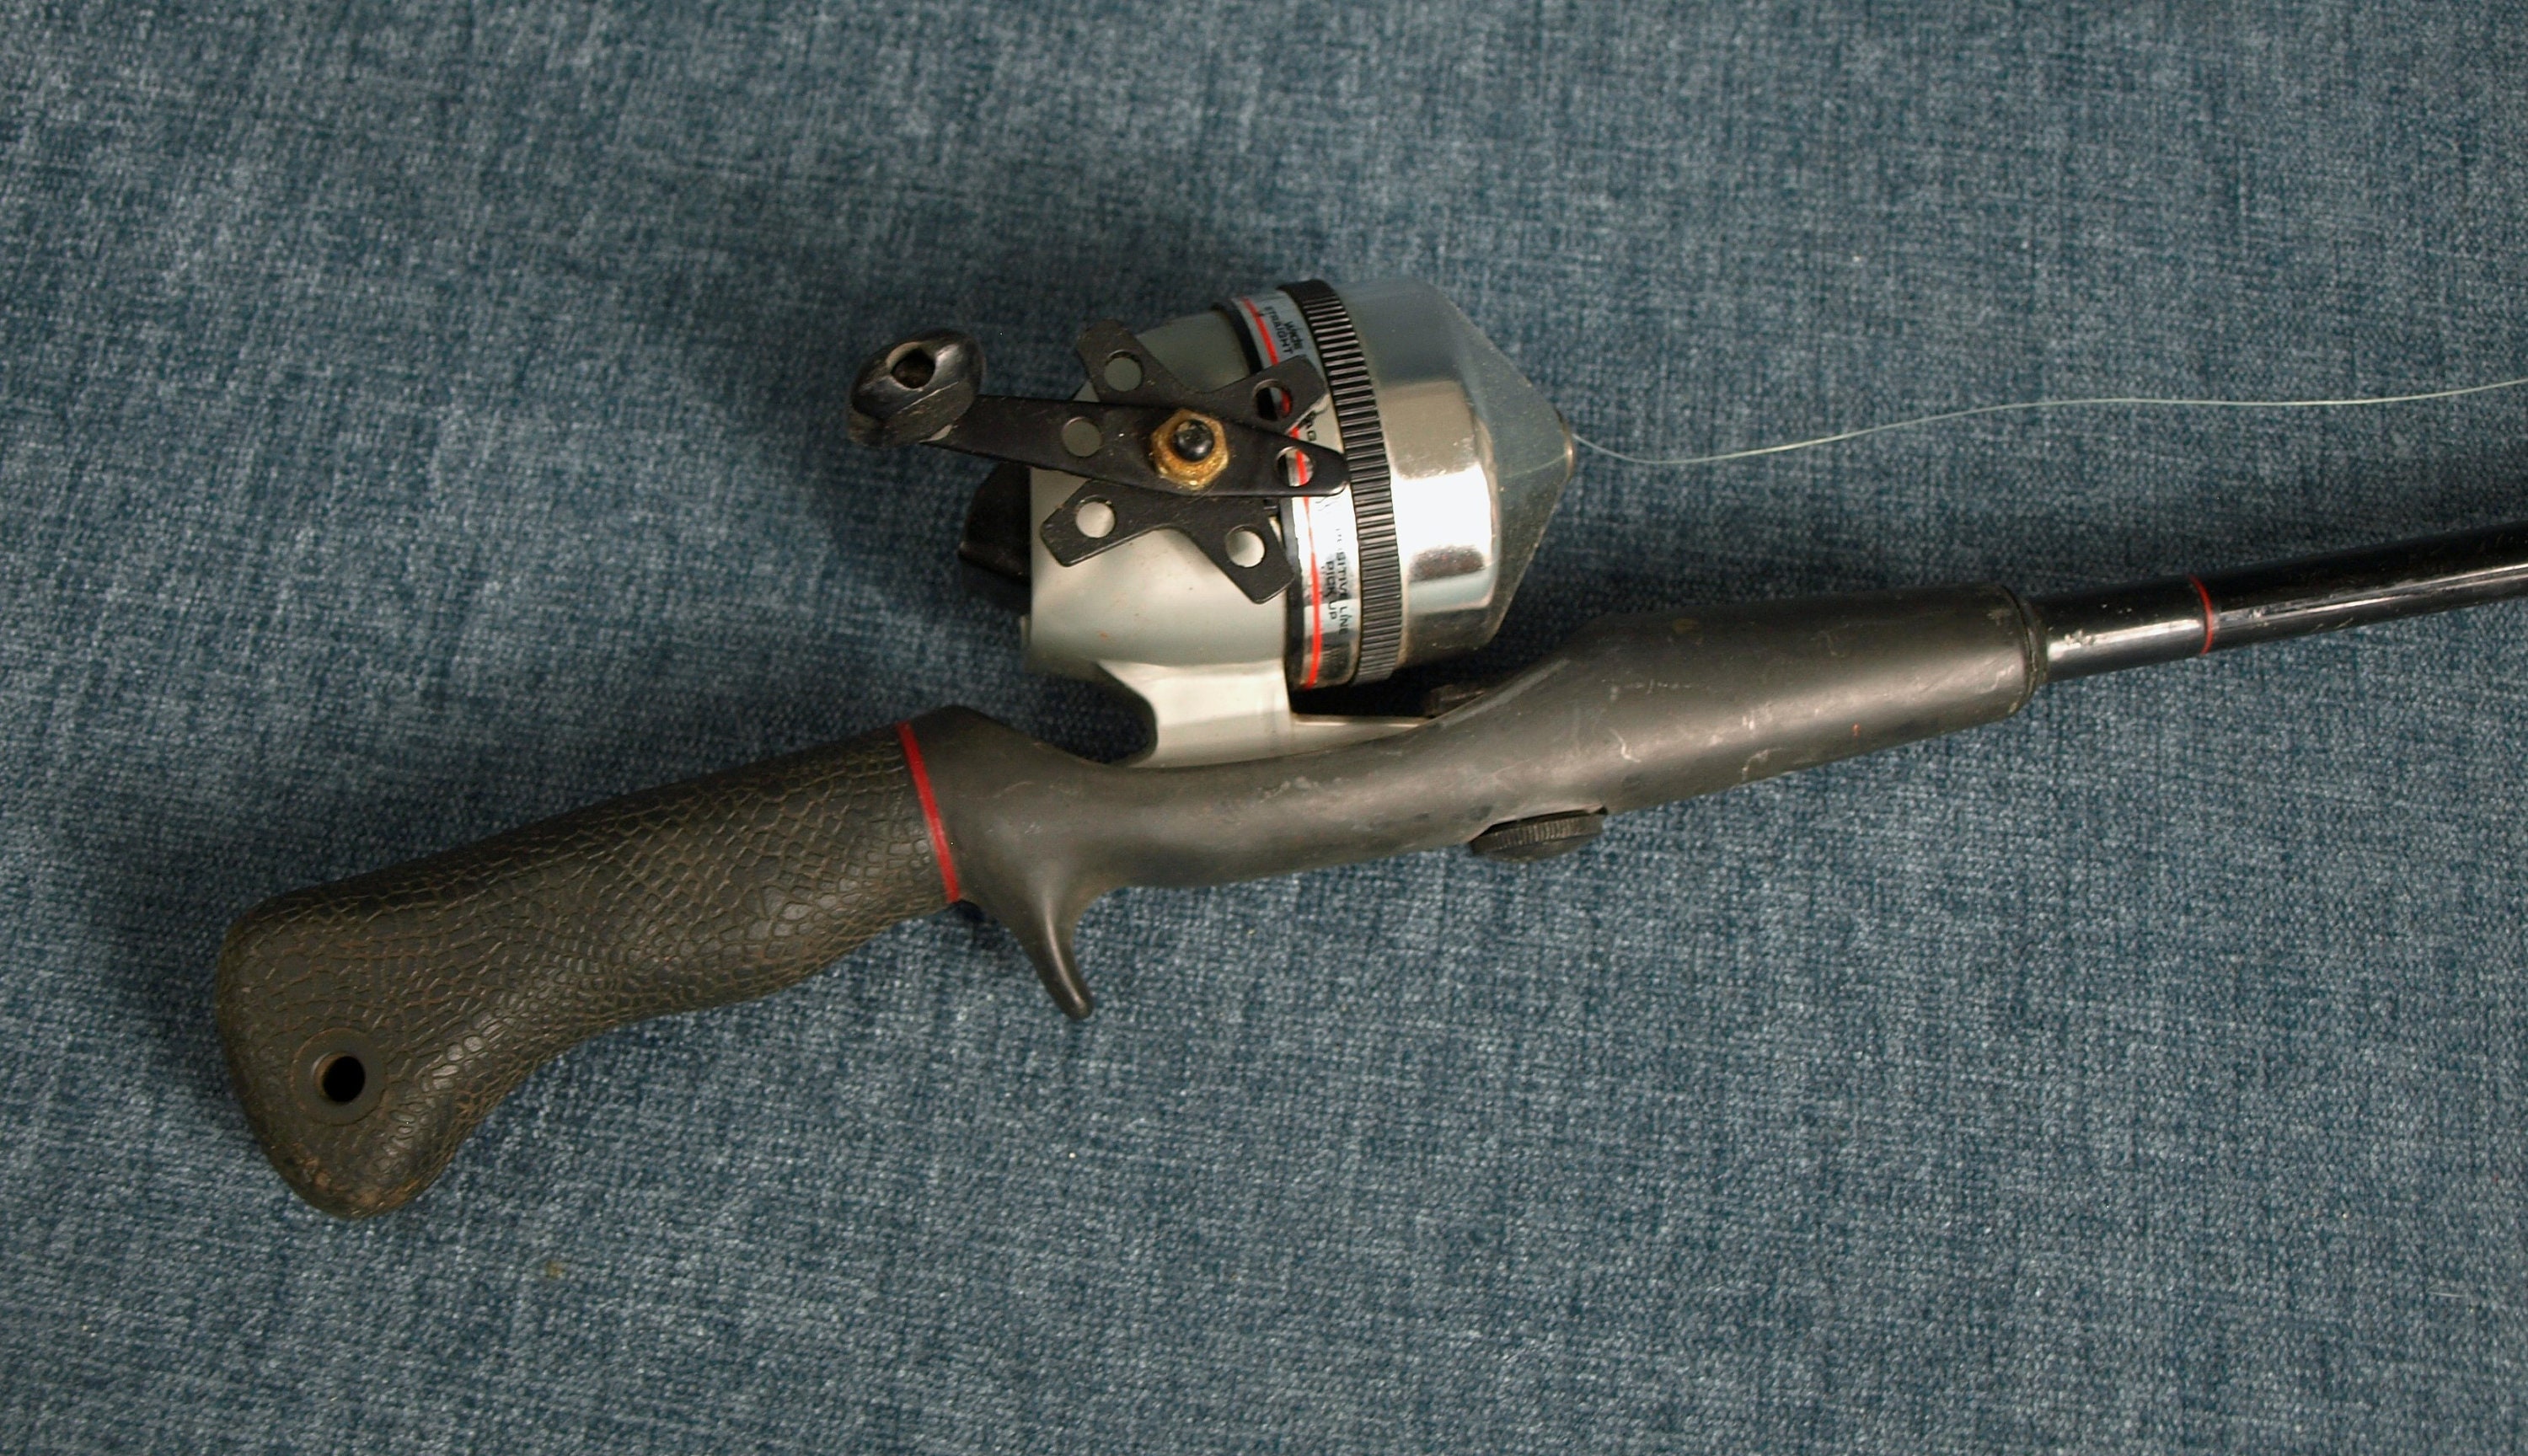 Reserved - Vintage Shiman AC-1552 Pistol Grip Fishing Rod - 5'6 line wt.  6-12 lb lure wt 1/8-3/4 oz with Zebco 10/20 USA Spin Cast Reel